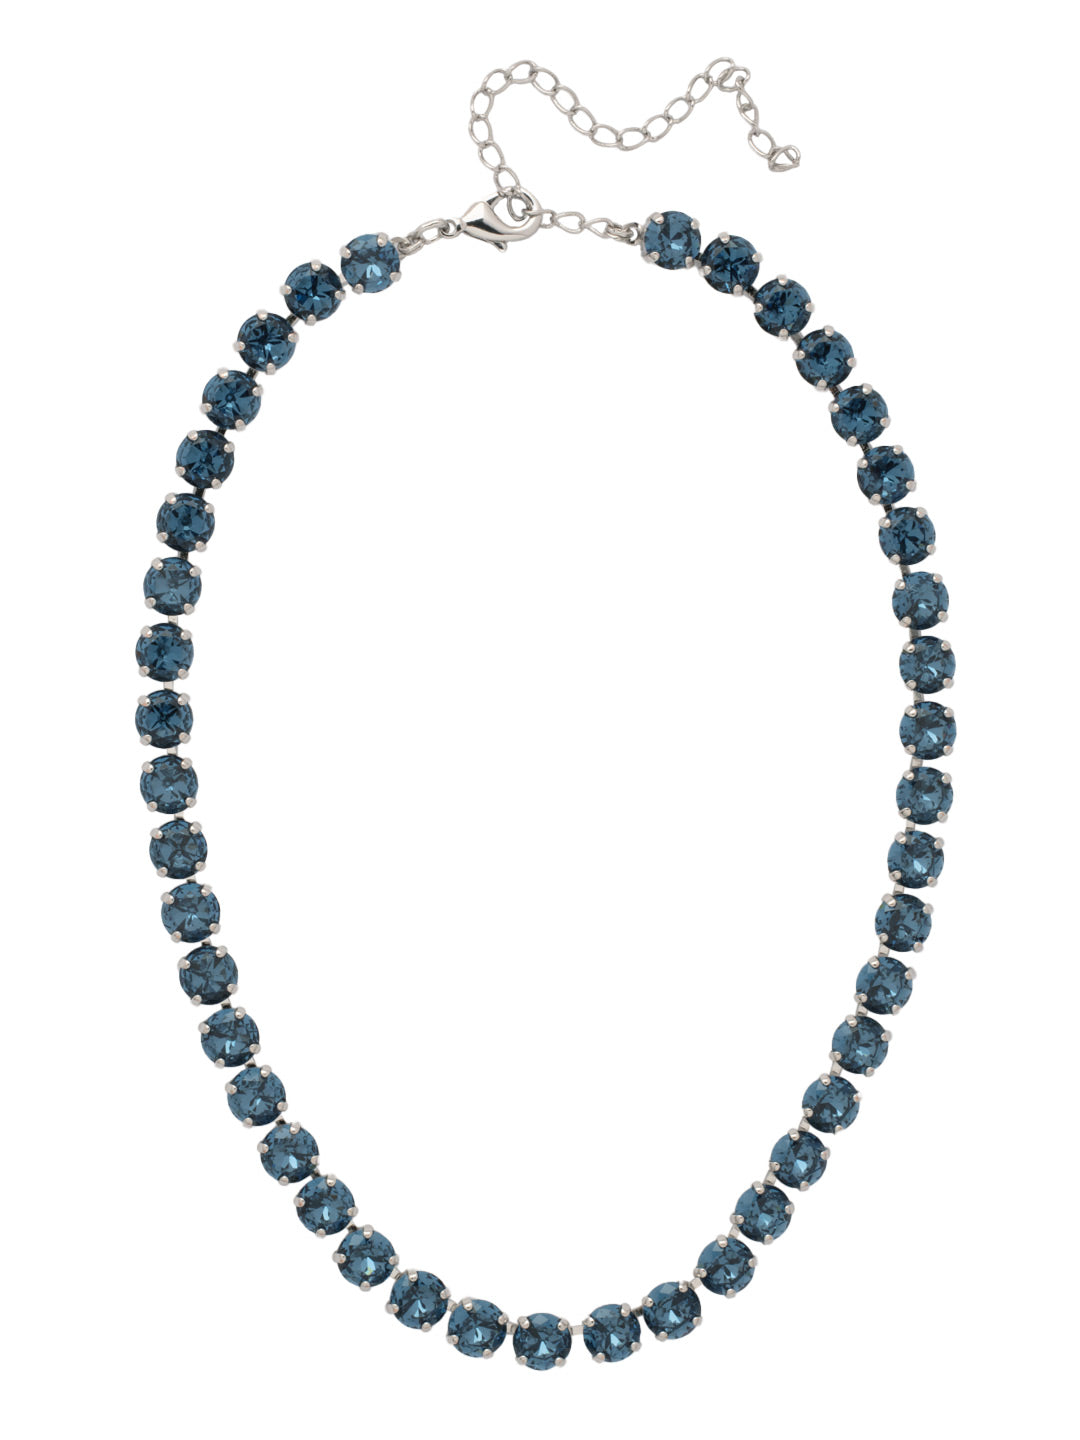 Matilda Tennis Necklace - NFJ4PDASP - <p>The Matilda Tennis Necklace features a repeating line of round cut crystals on an adjustable chain, secured with a lobster claw clasp. From Sorrelli's Aspen SKY collection in our Palladium finish.</p>